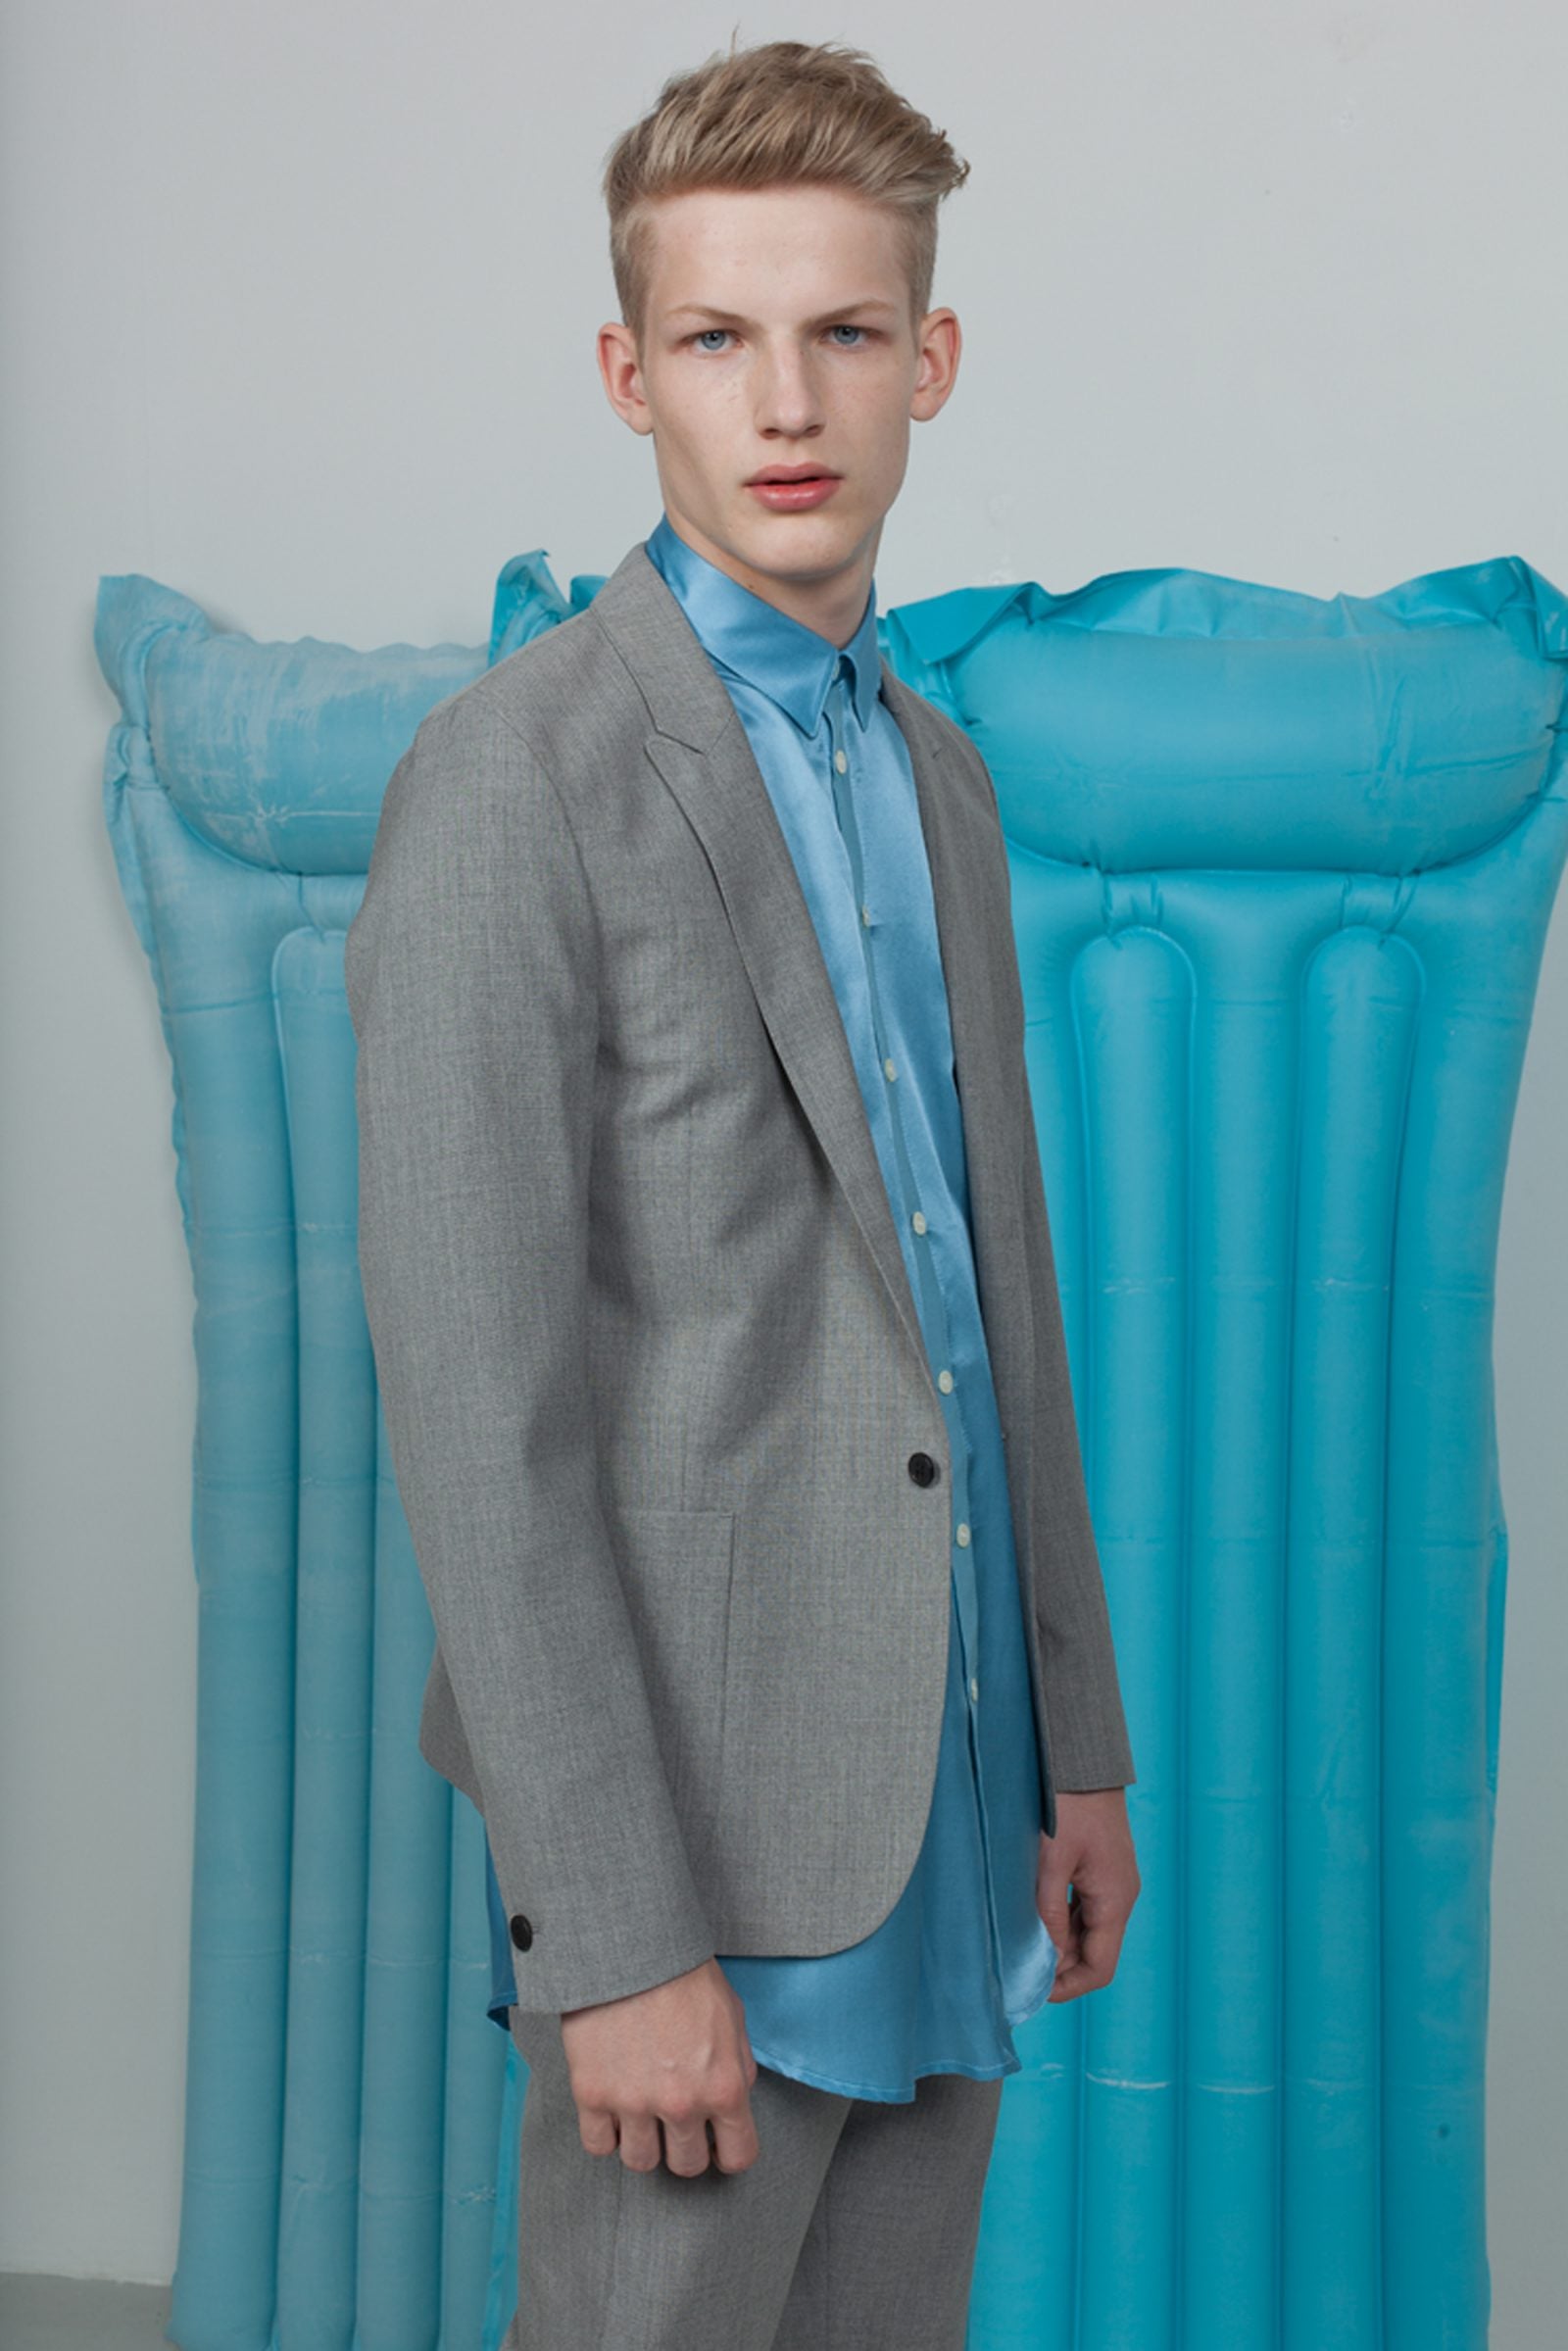 2013 S/S PATCH POCKET SUIT WITH ONE SIDE DYED AND COATED COTTON